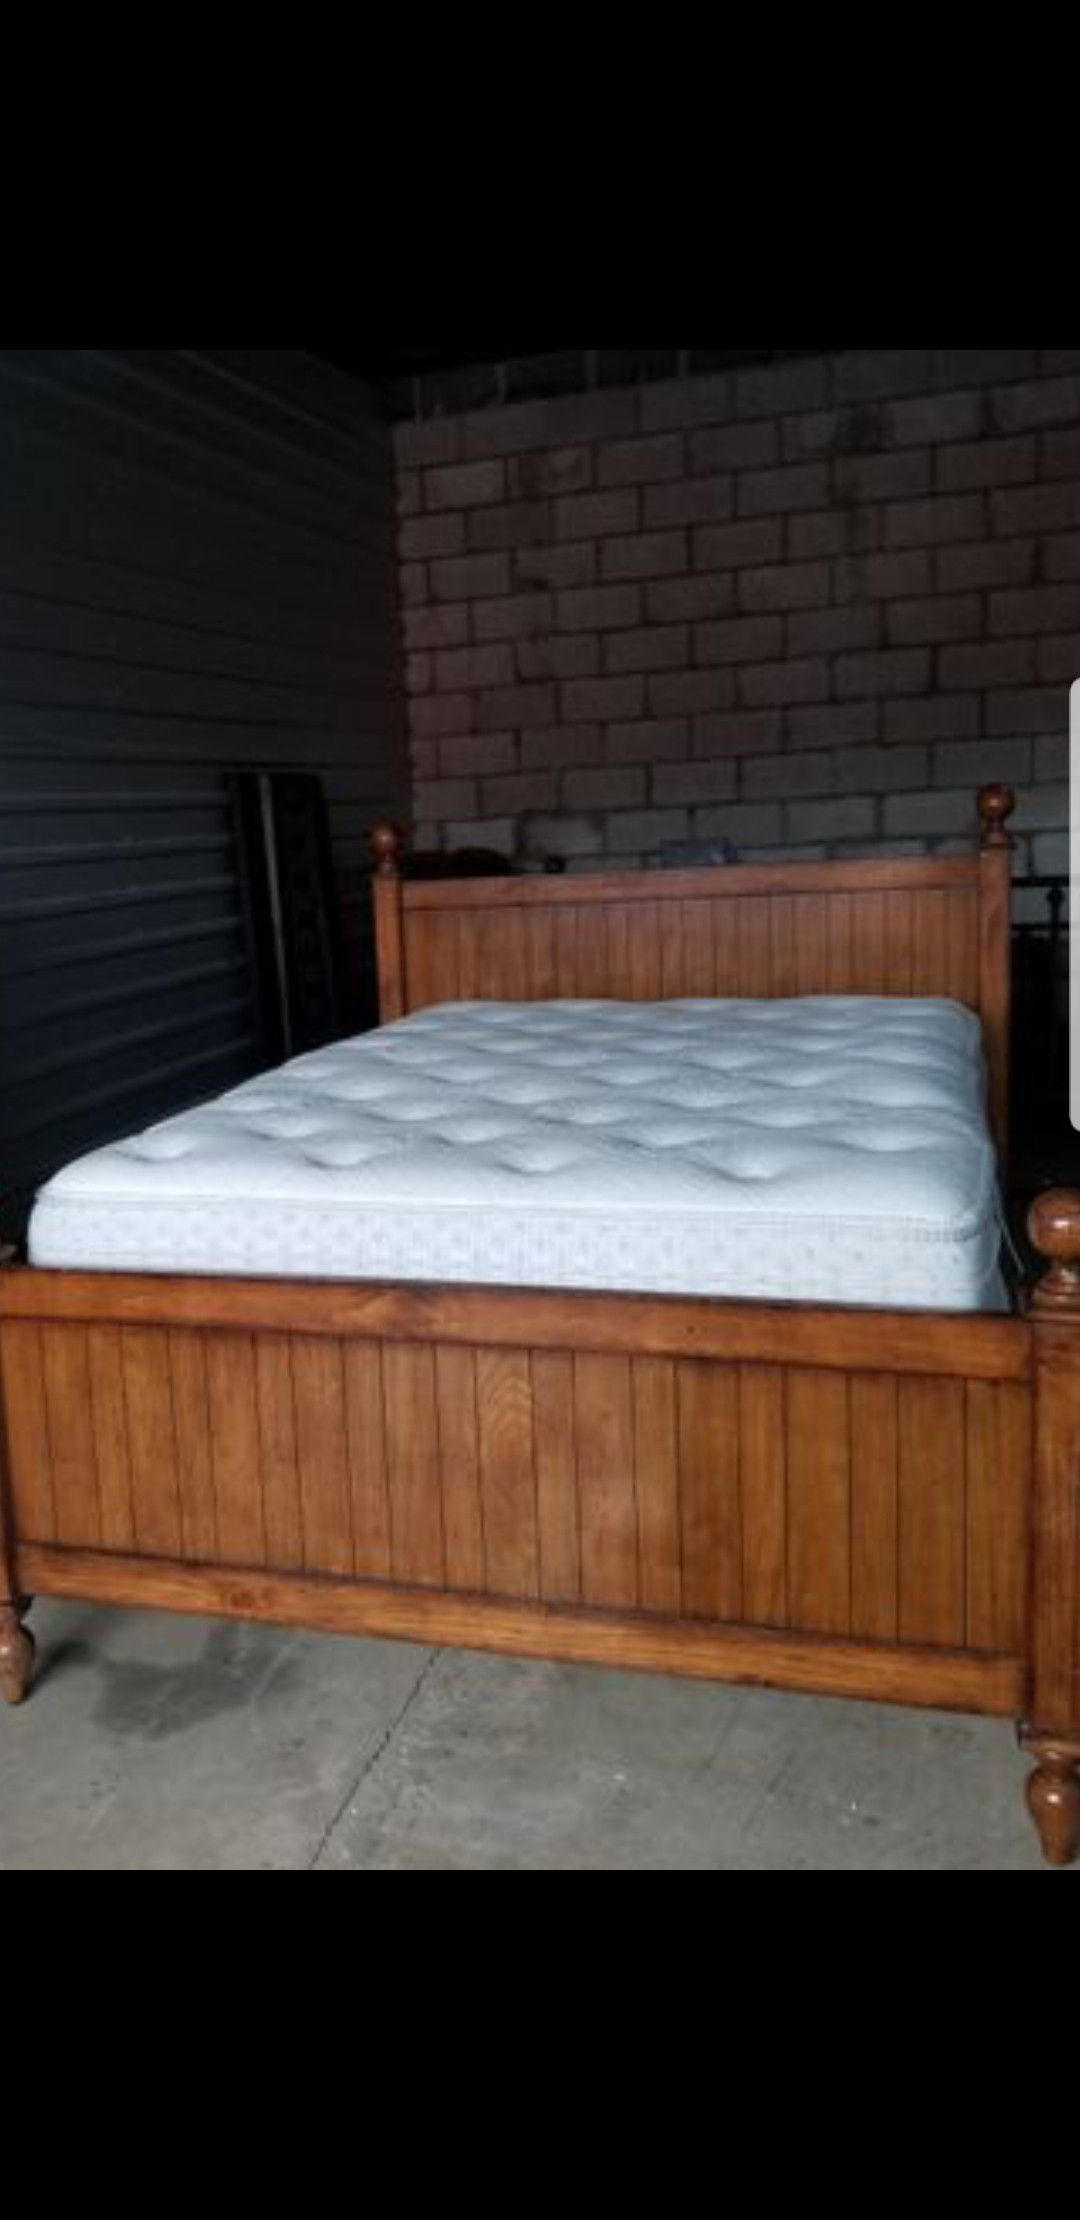 Full size mattress and box springs